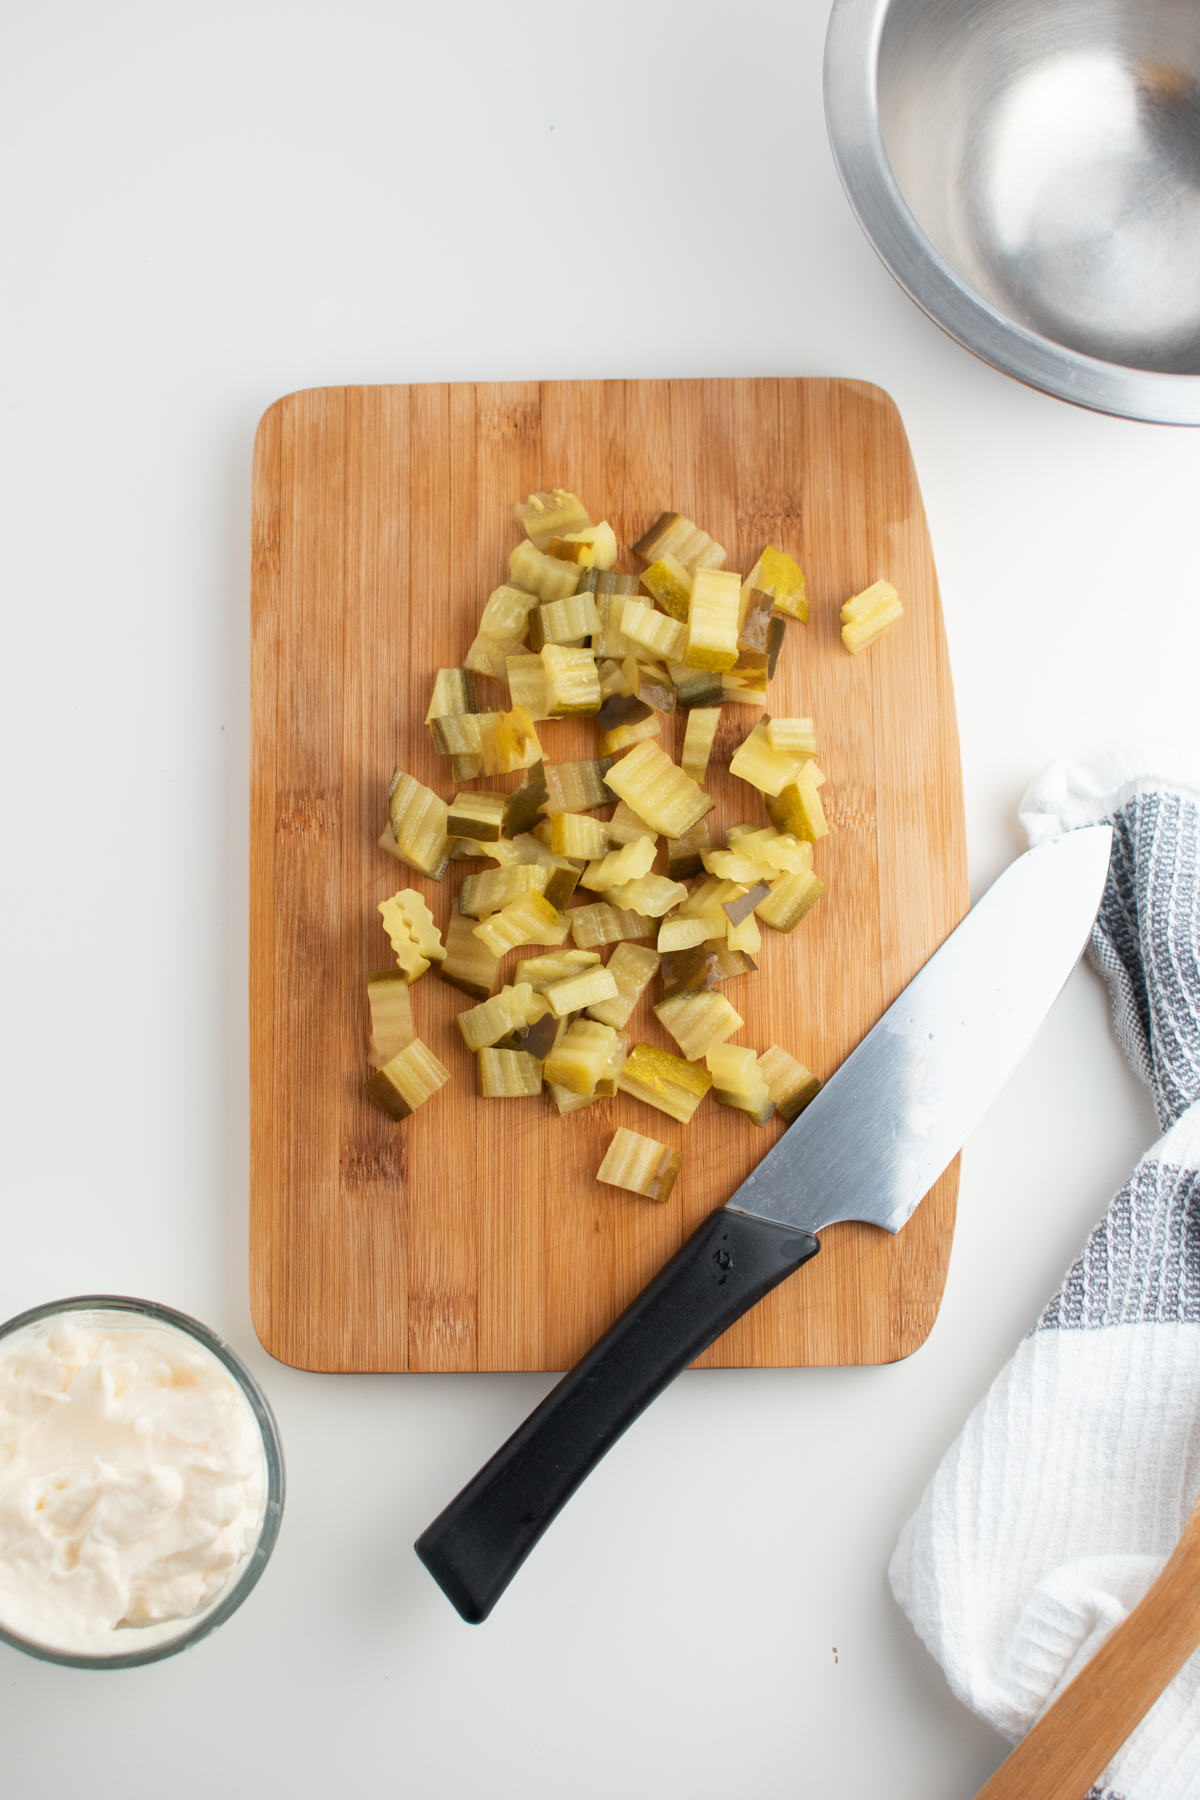 Several chopped pickles on wooden cutting board with knife and kitchen towel.